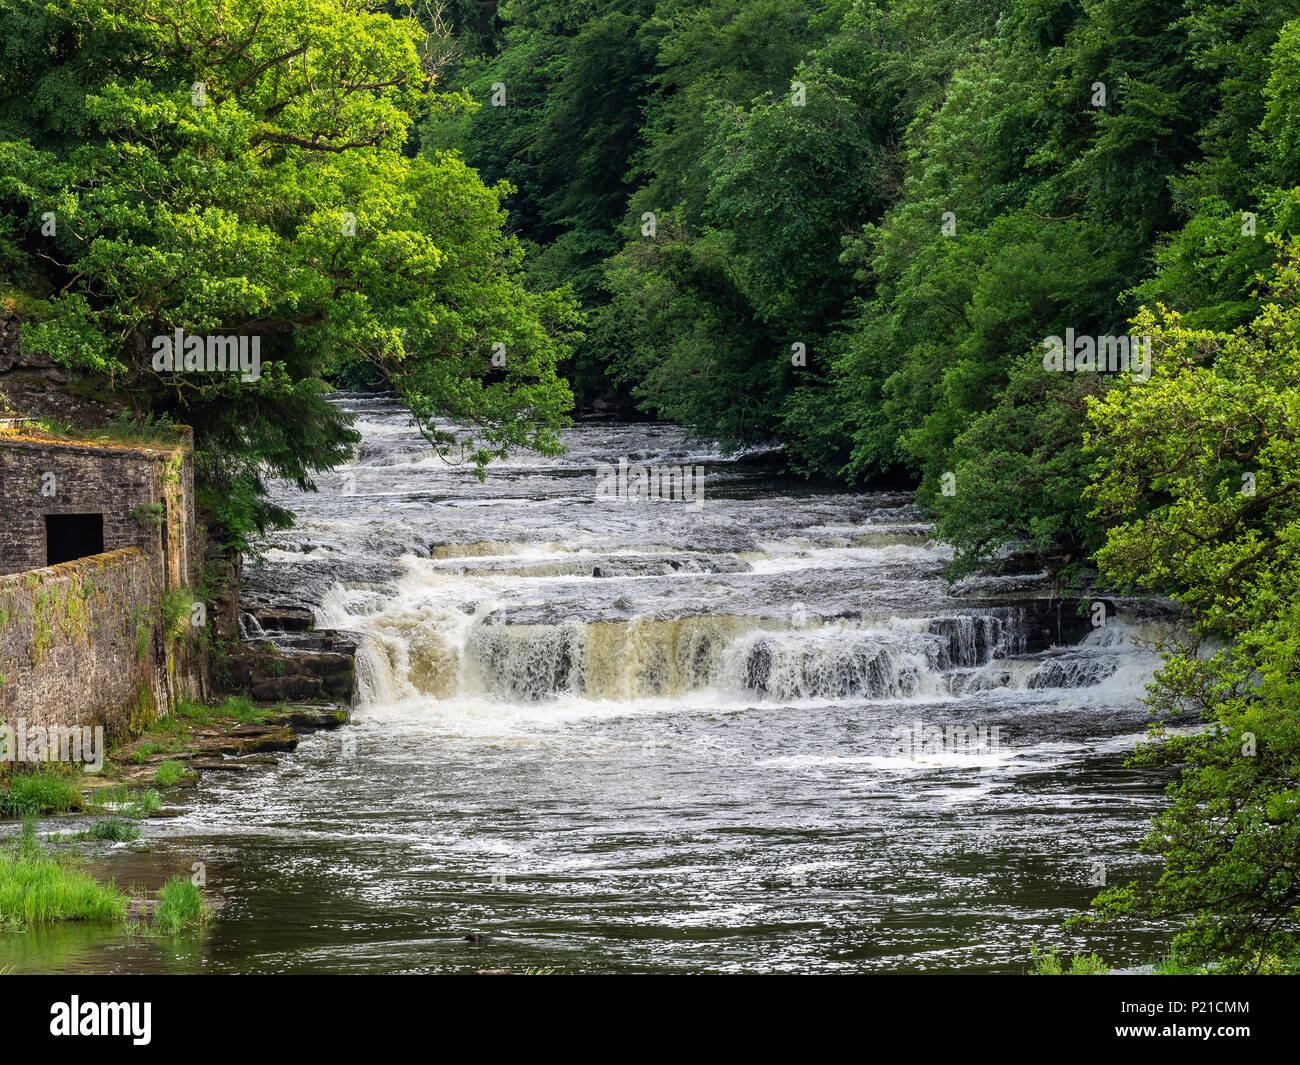 Waterfalls at the New Lanark World Heritage Site a unique 18th century mill village sitting alongside the picturesque River Clyde in Scotland Stock Photo